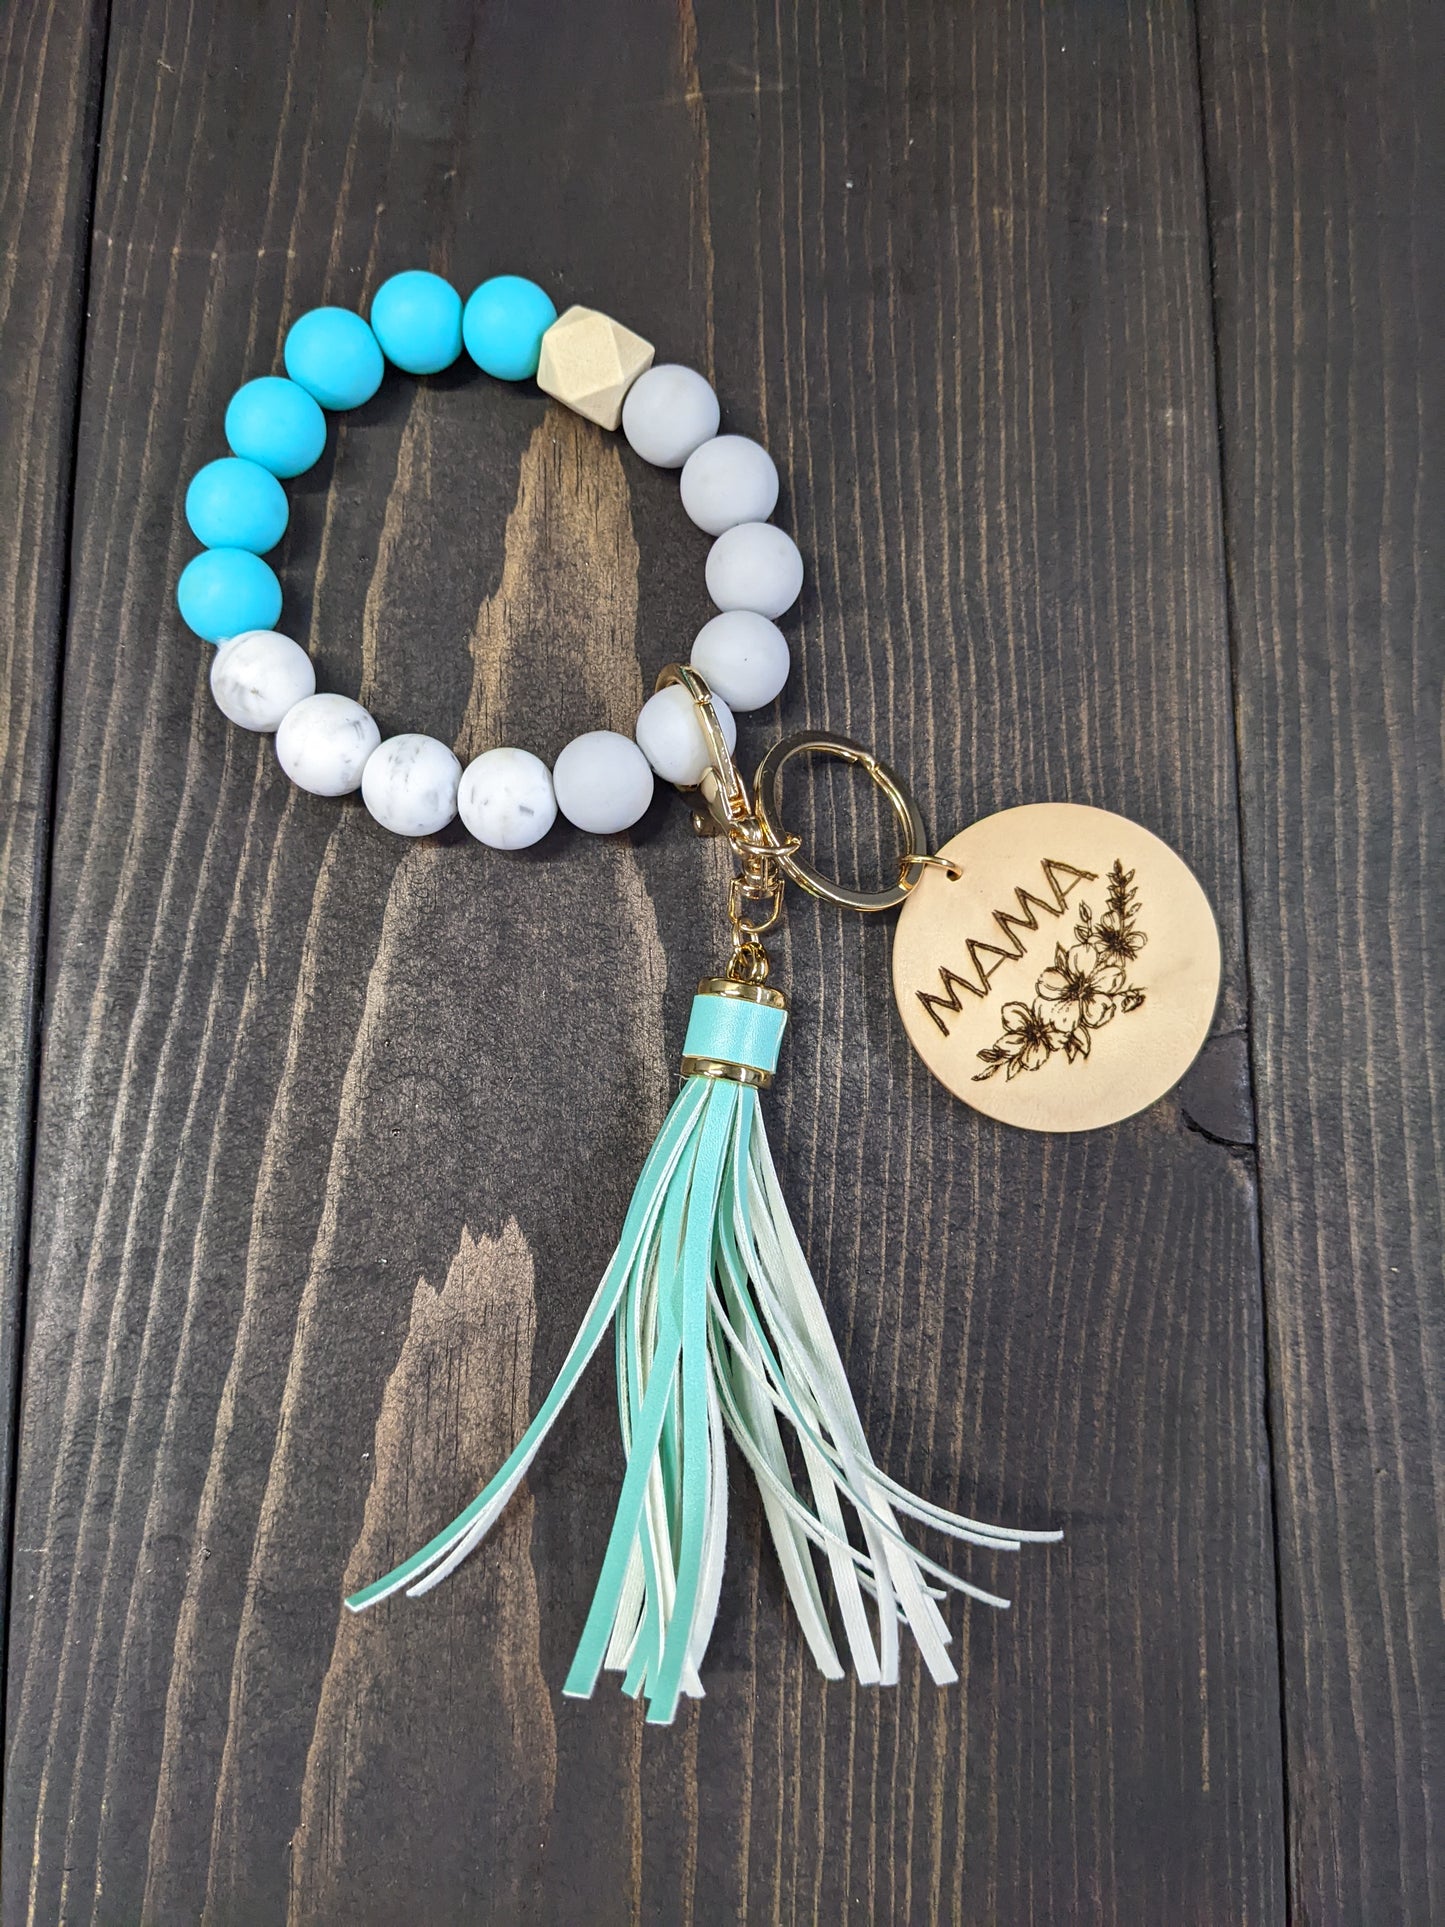 Key Chain wristlet- Light Blue Marble and blue tassels w/ MAMA engraved wood disk